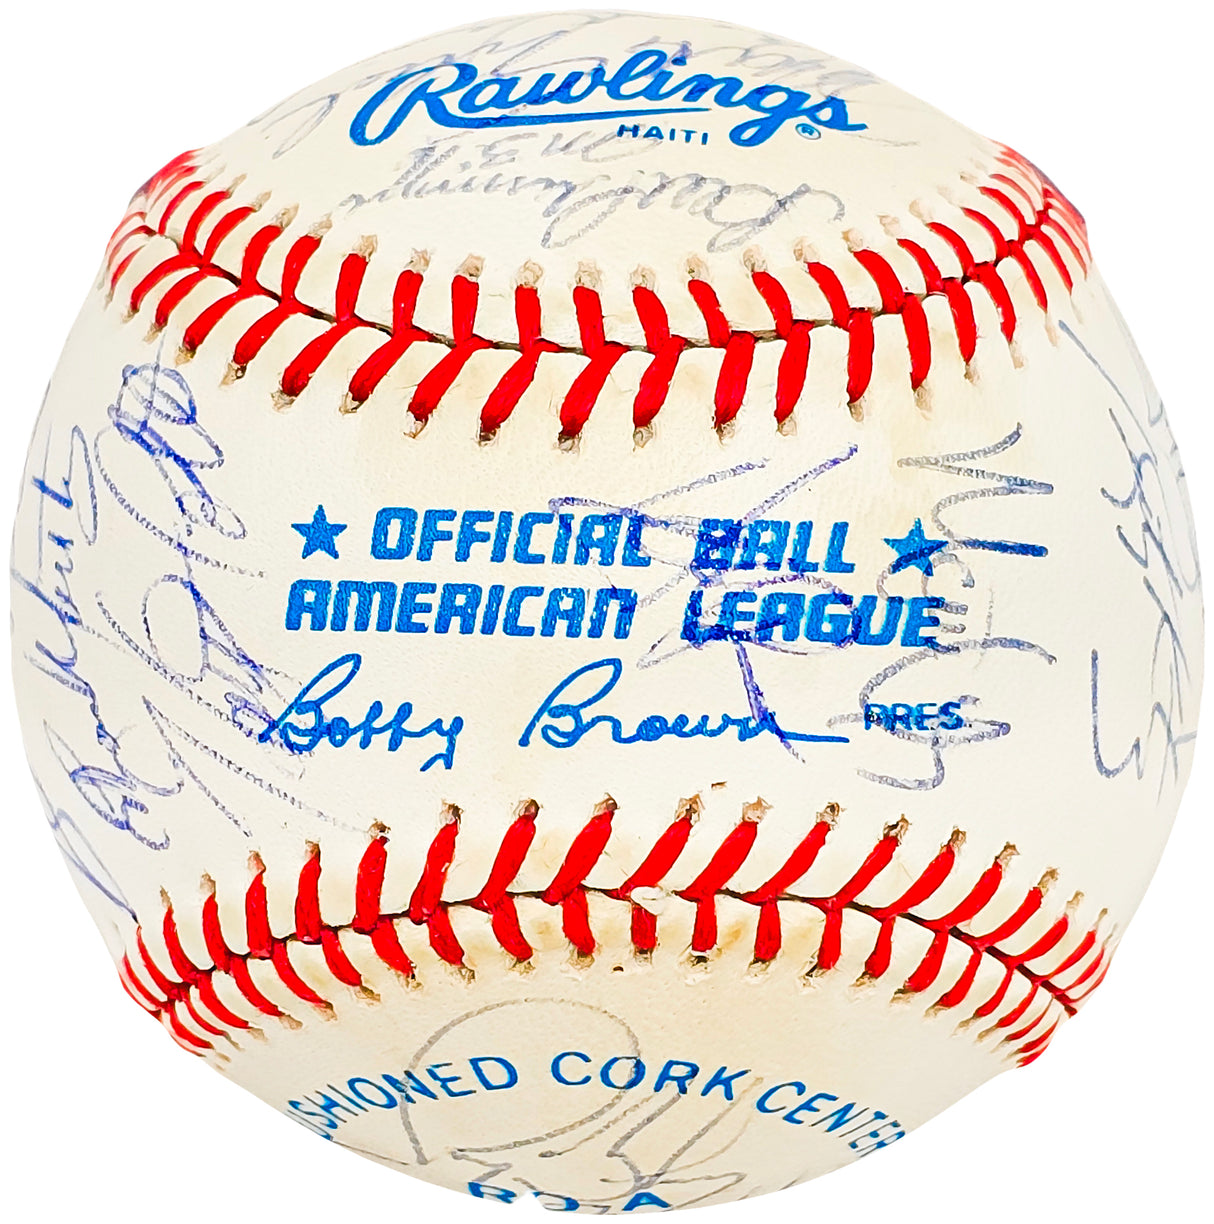 1990 Seattle Mariners Team Signed Autographed Official AL Baseball With 29 Signatures Including Ken Griffey Jr. & Edgar Martinez SKU #218488